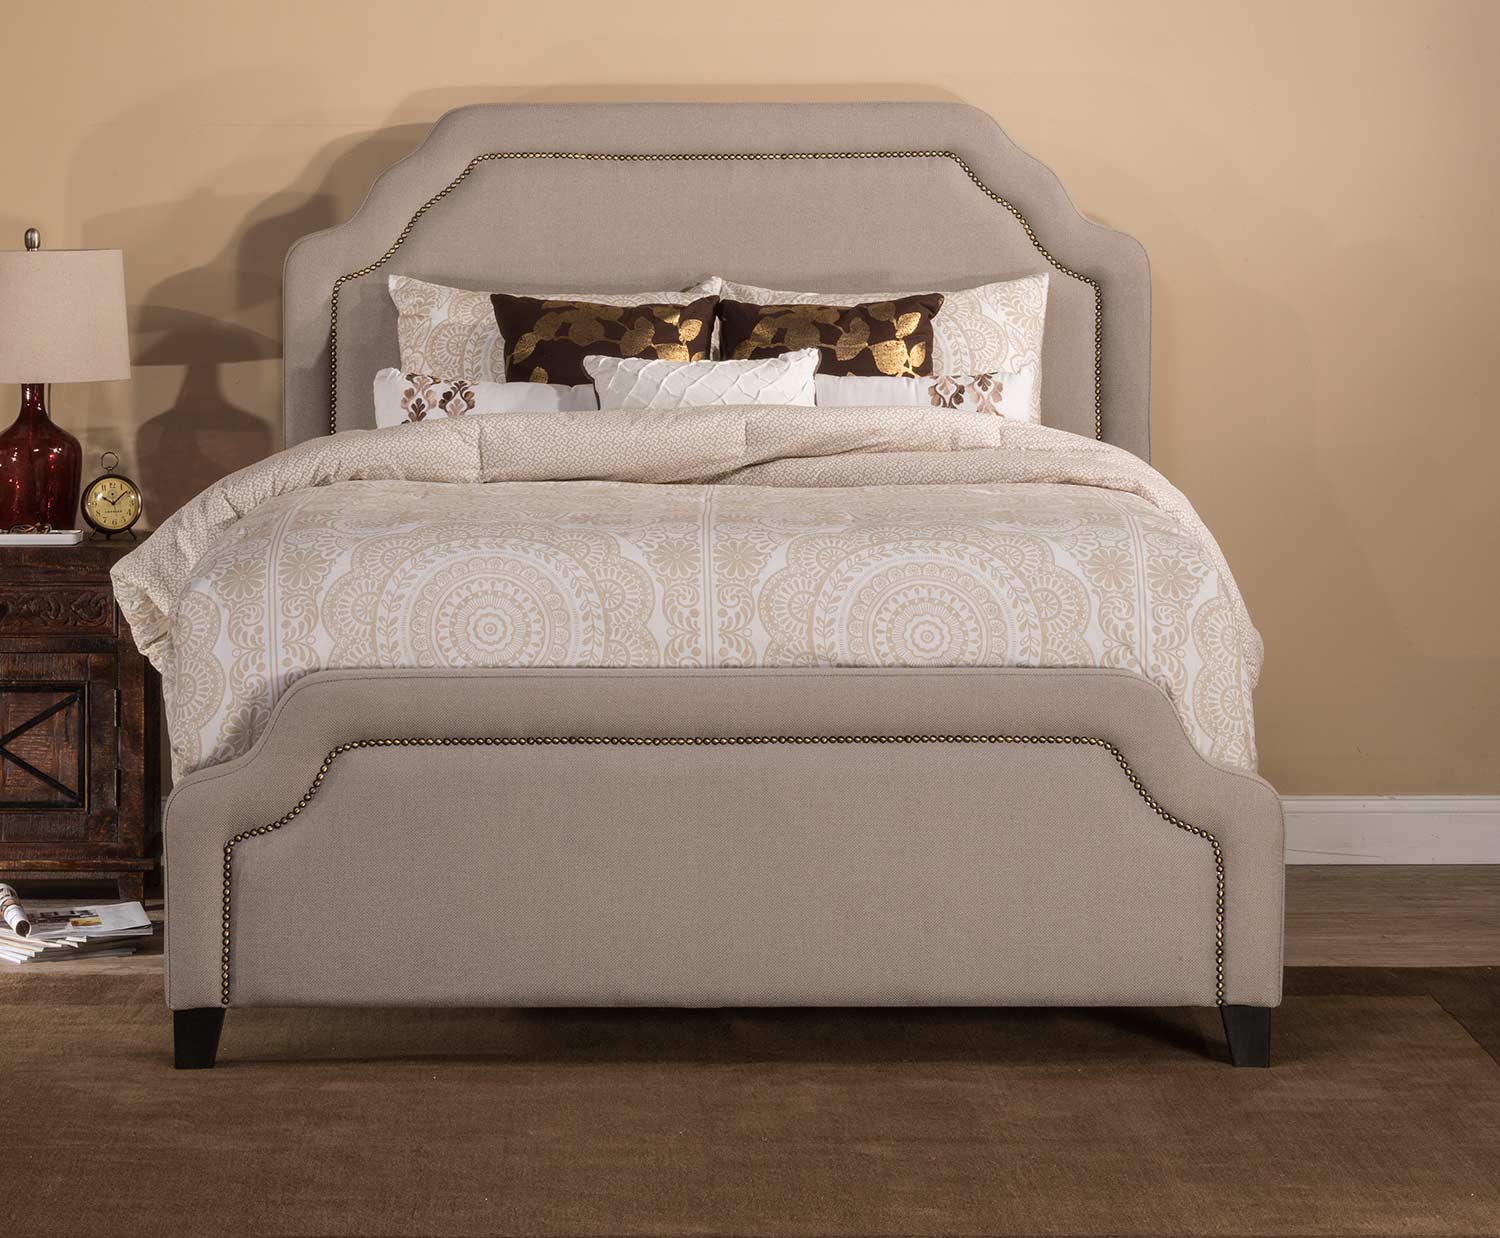 Hillsdale Carlyle Bed - Light Taupe